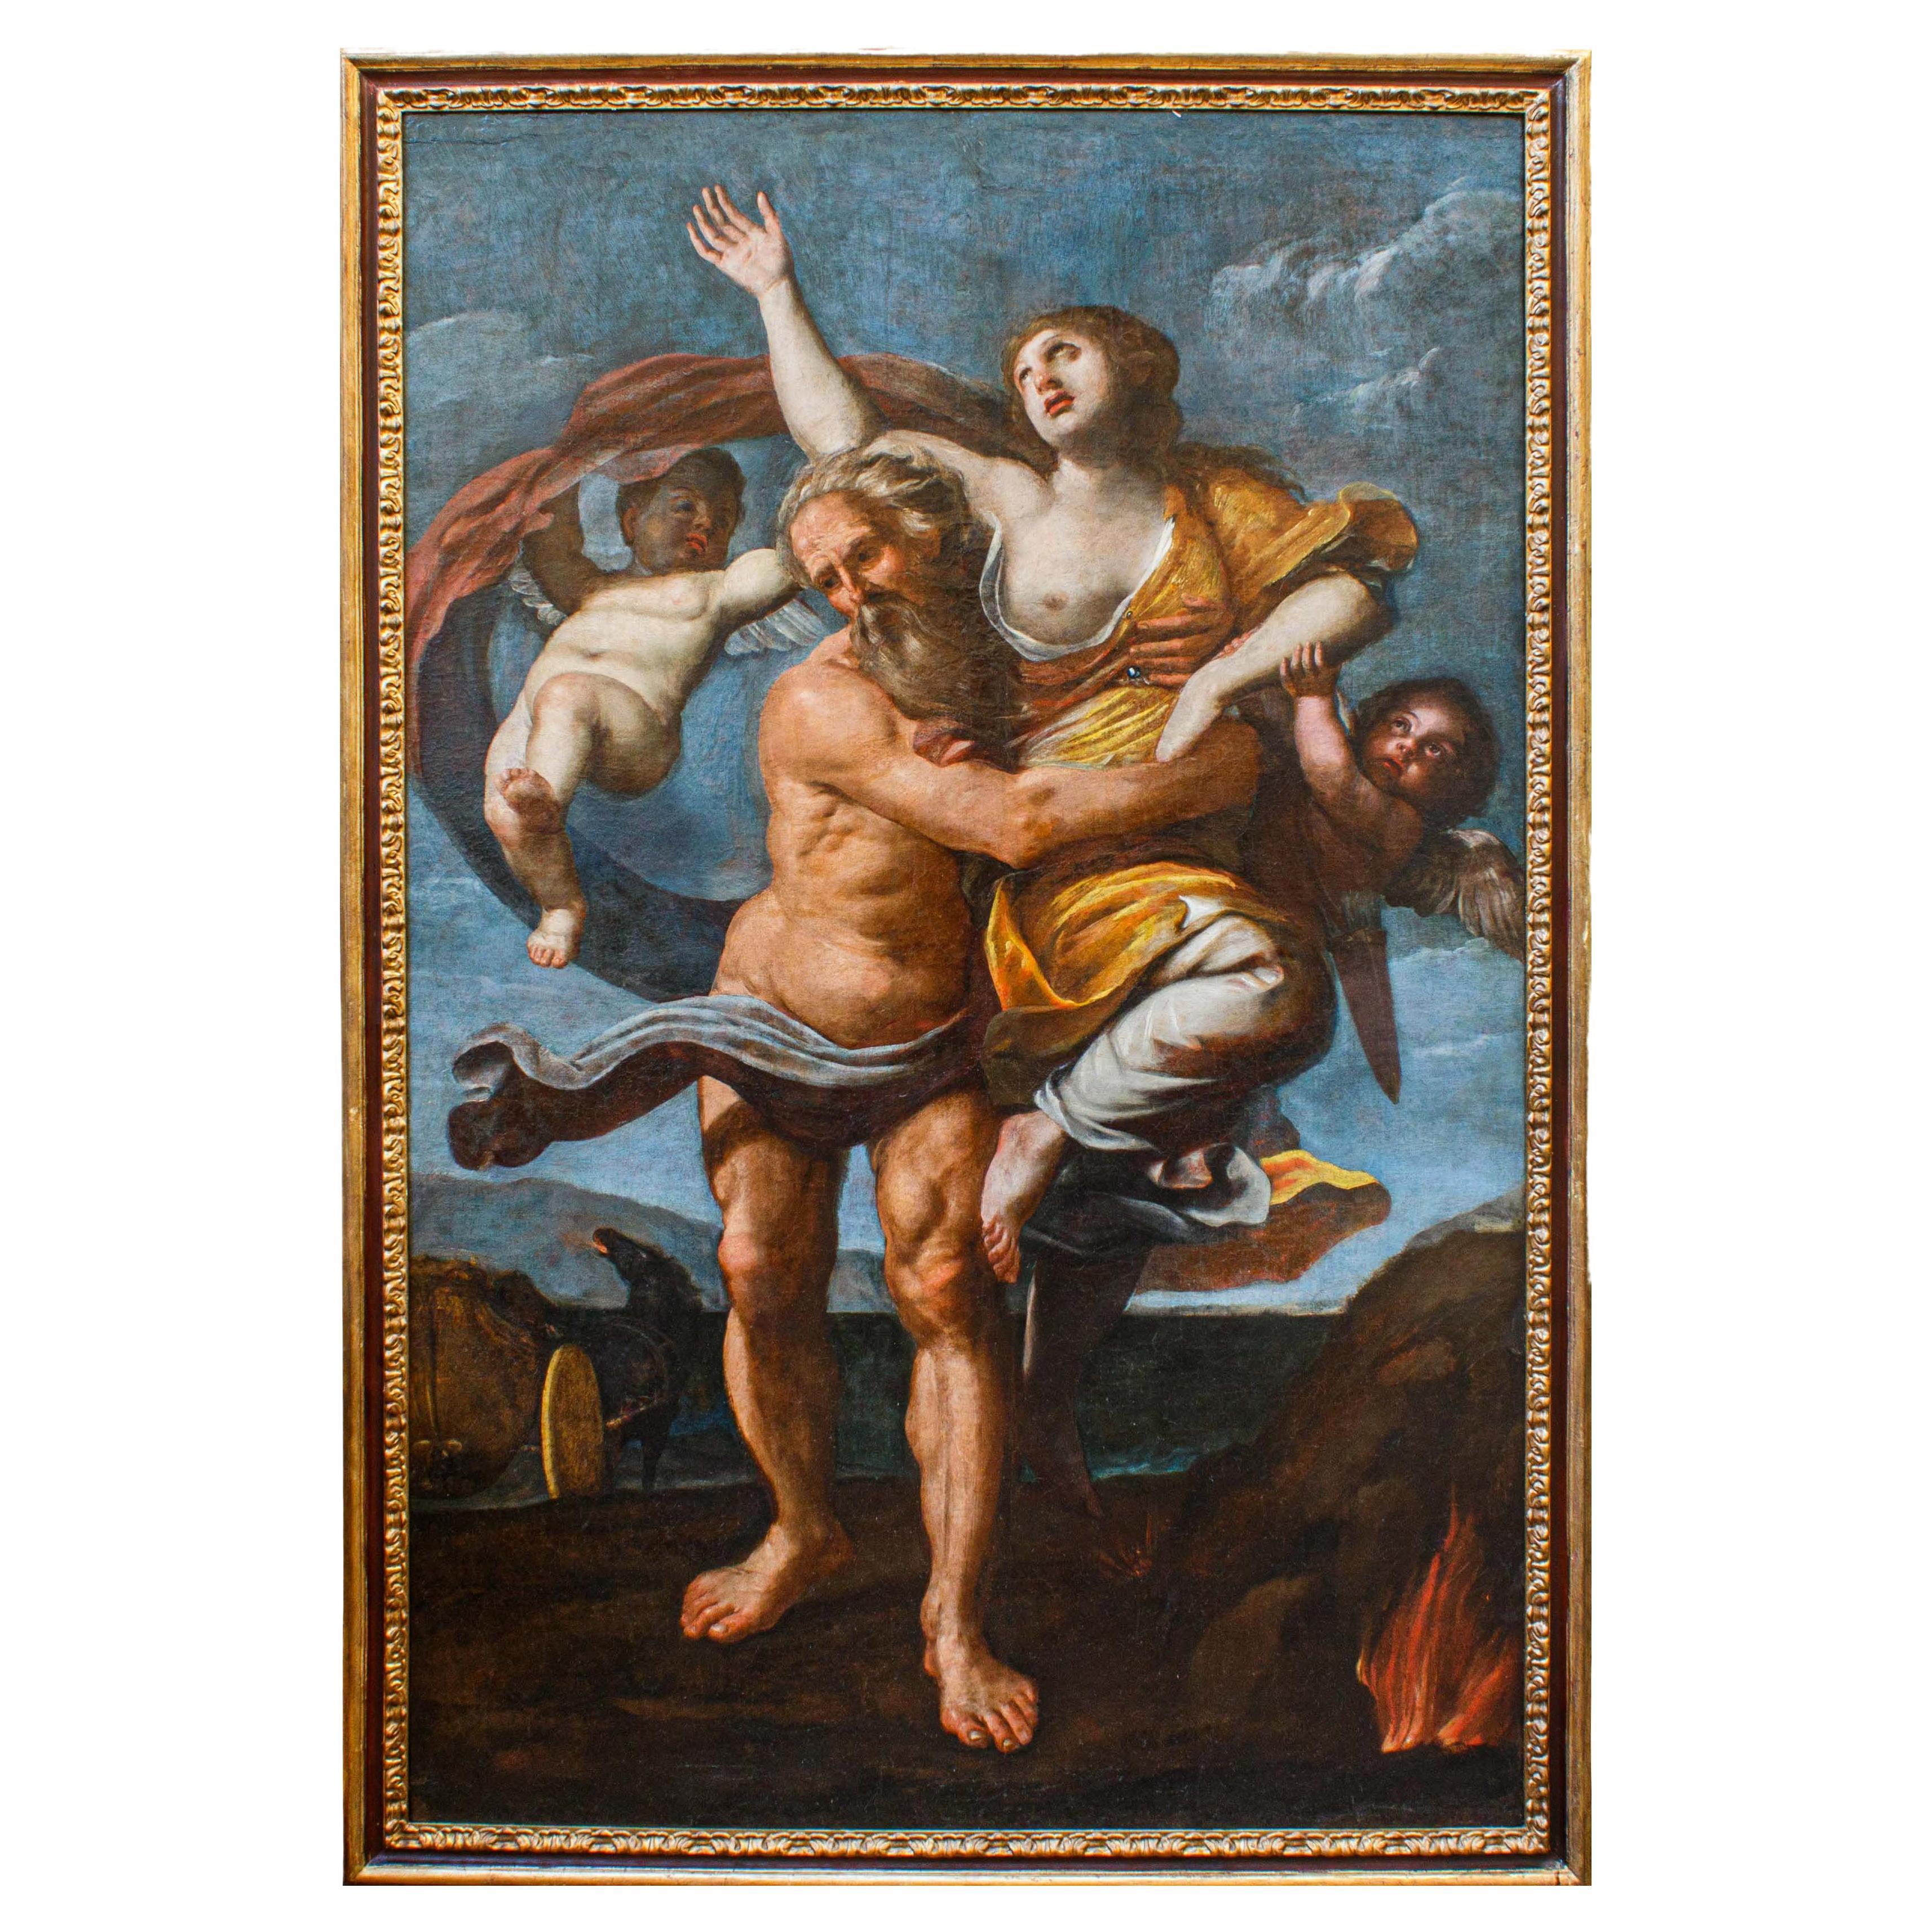 17th century Oil on canvas depicting the Rape of Proserpine For Sale